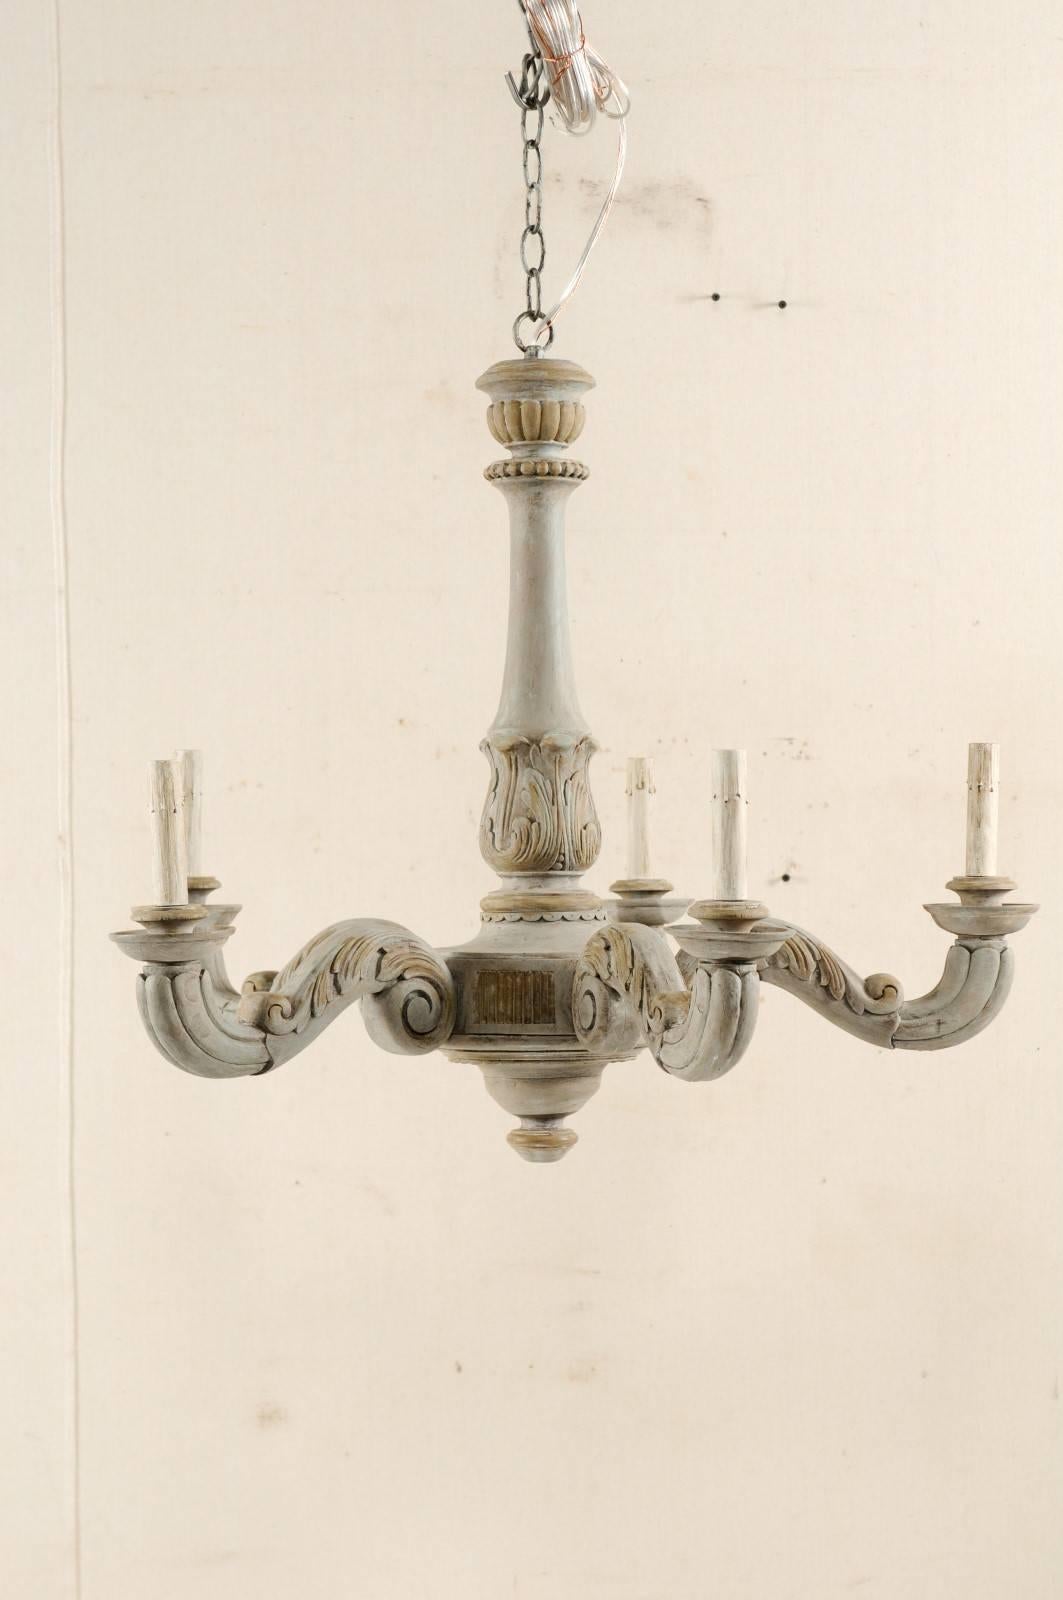 A French carved and painted wood five-light vintage chandelier. This lovely French chandelier from the mid-20th century features a carved central column adorn with dotted trim and acanthus leaf wraps. There are recessed fluted panels on the more